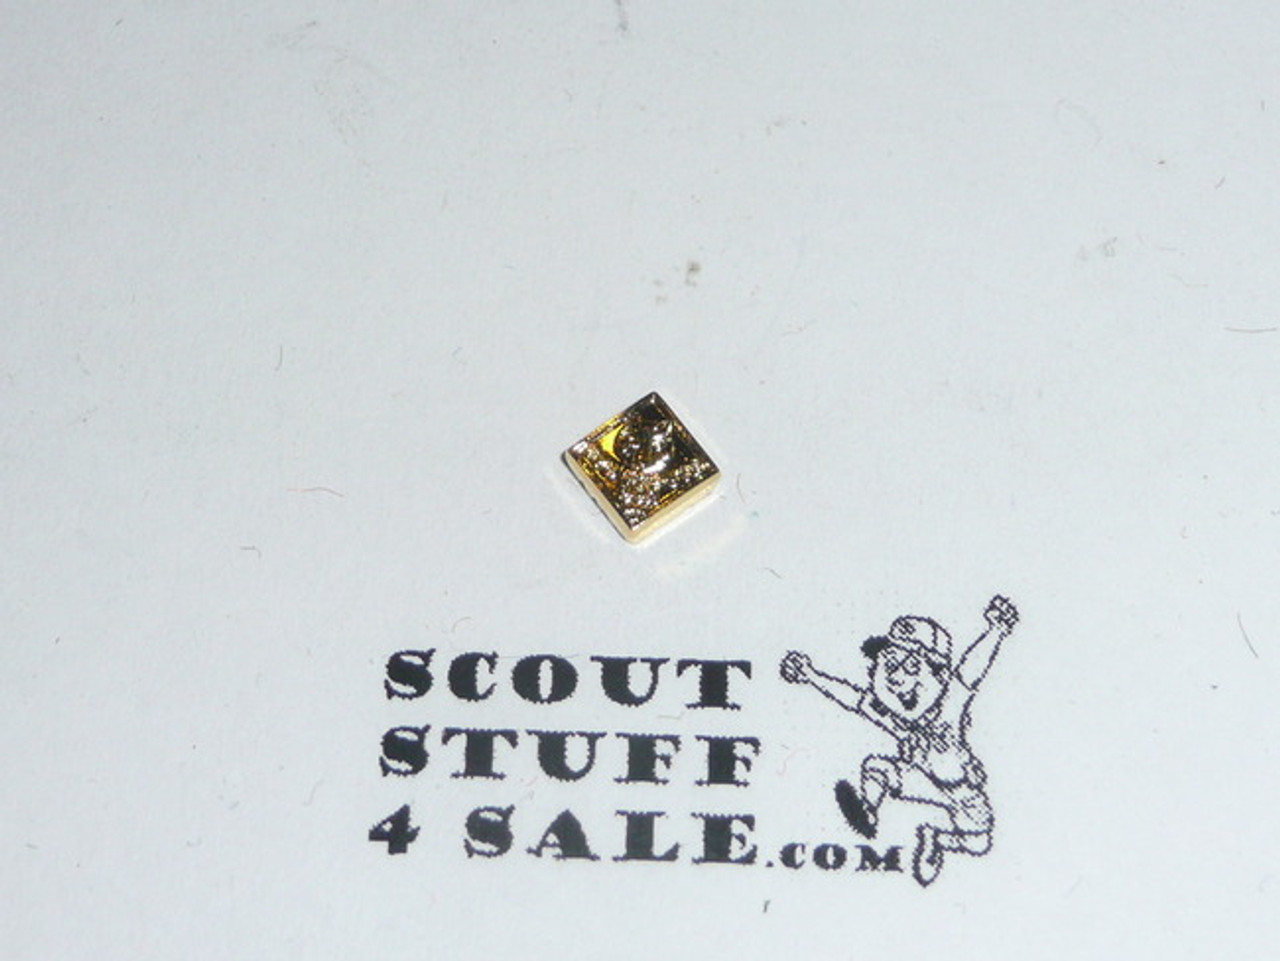 Cub Scout Trained Device for Outdoor Belt Buckle or can be glued on a training knot